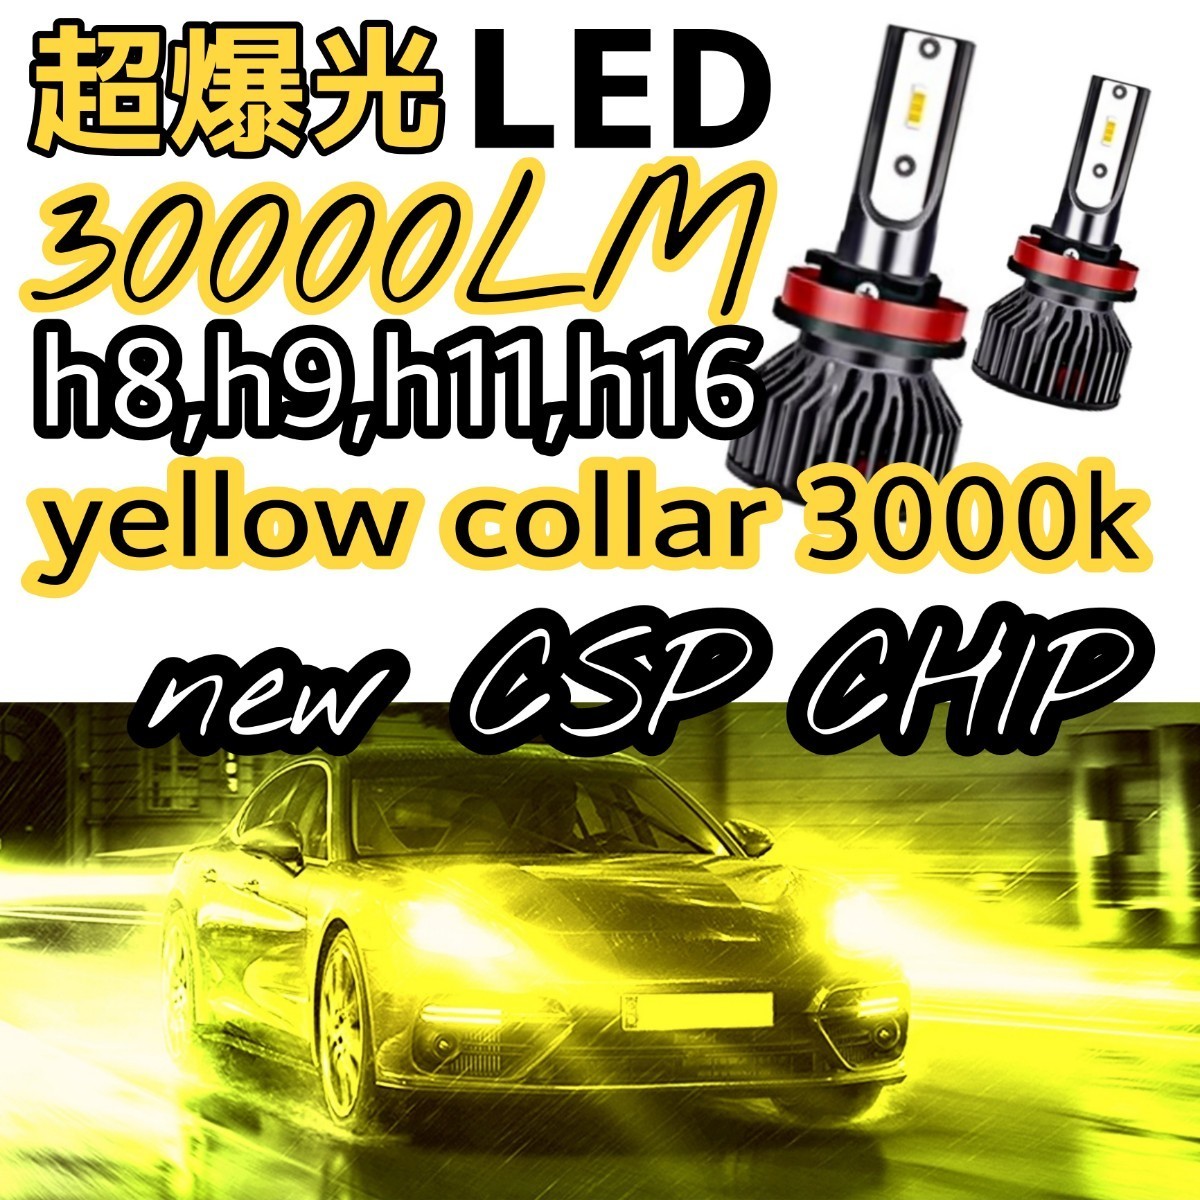  holiday . shipping!*HID.. bright!!* super . light 30000LM yellow LED foglamp or head light thin type model!H8,H9,H11,H16 newest CSP chip installing 